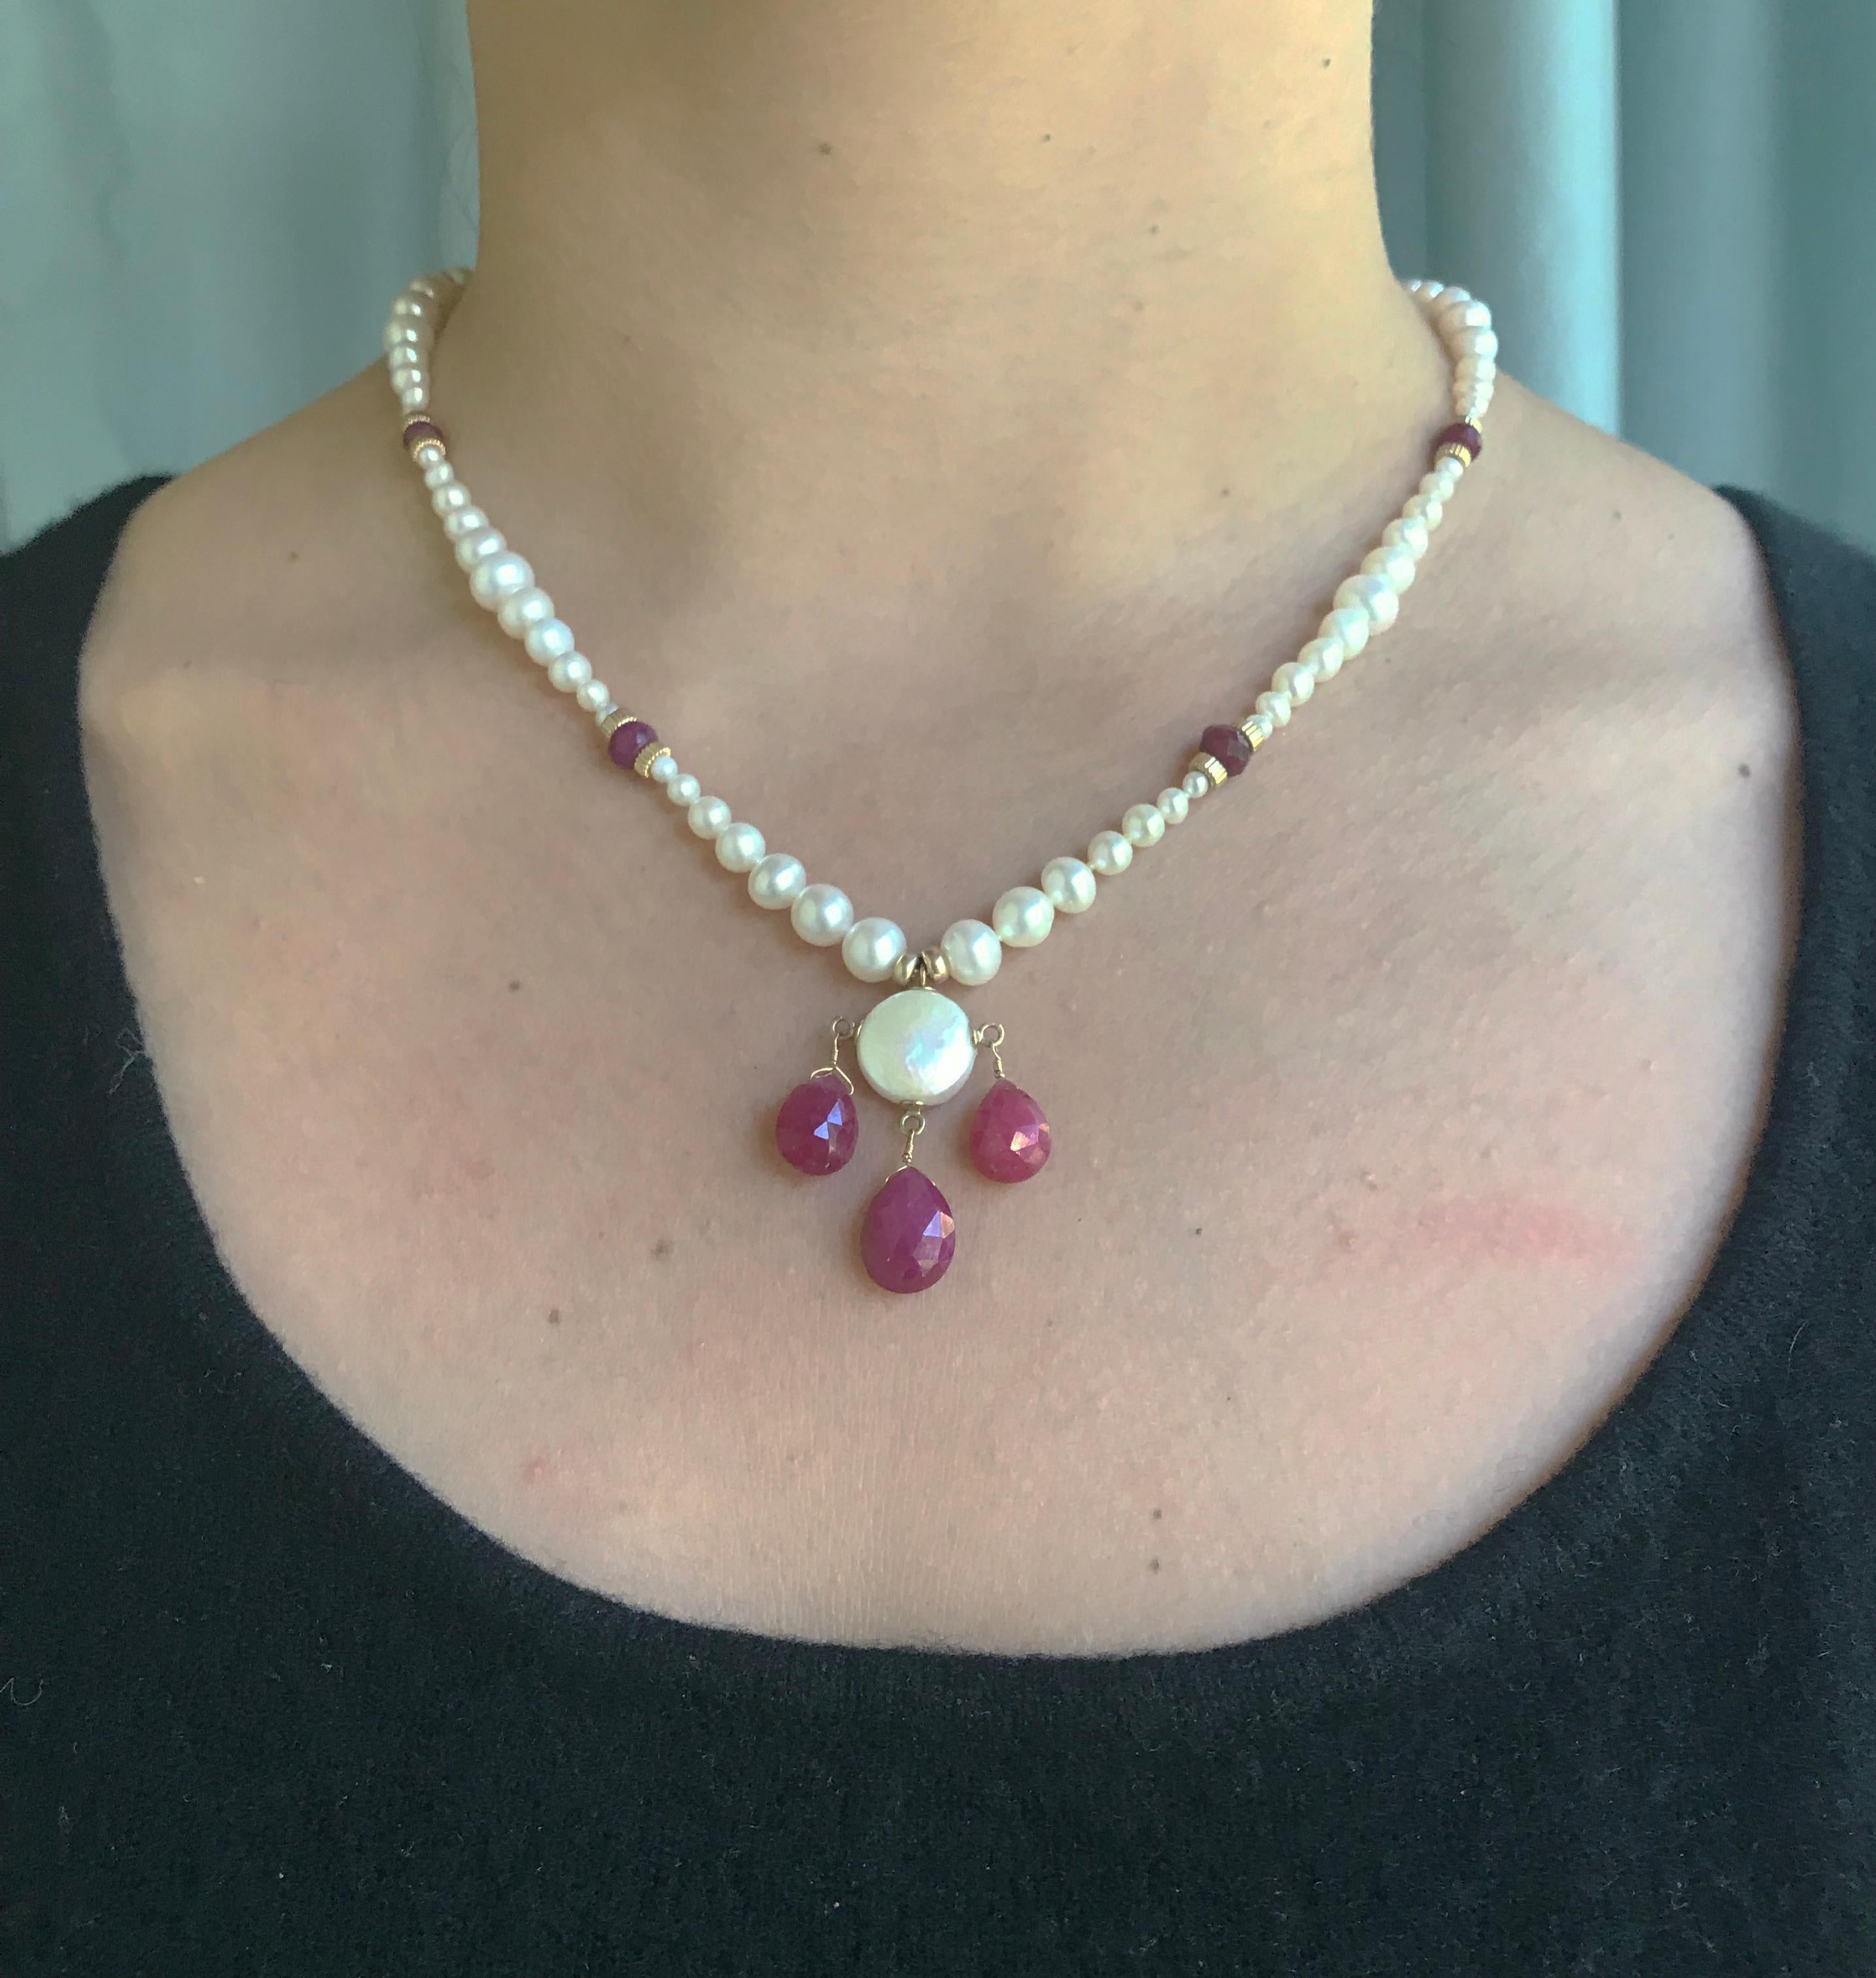 This romantic pearl necklace has a delicate pearl coin with teardrop ruby beads and 14k yellow gold beads and clasp. The white pearl necklace is 18.5 inches in length, highlighting the grace and elegance of the neckline. Each pearl was carefully